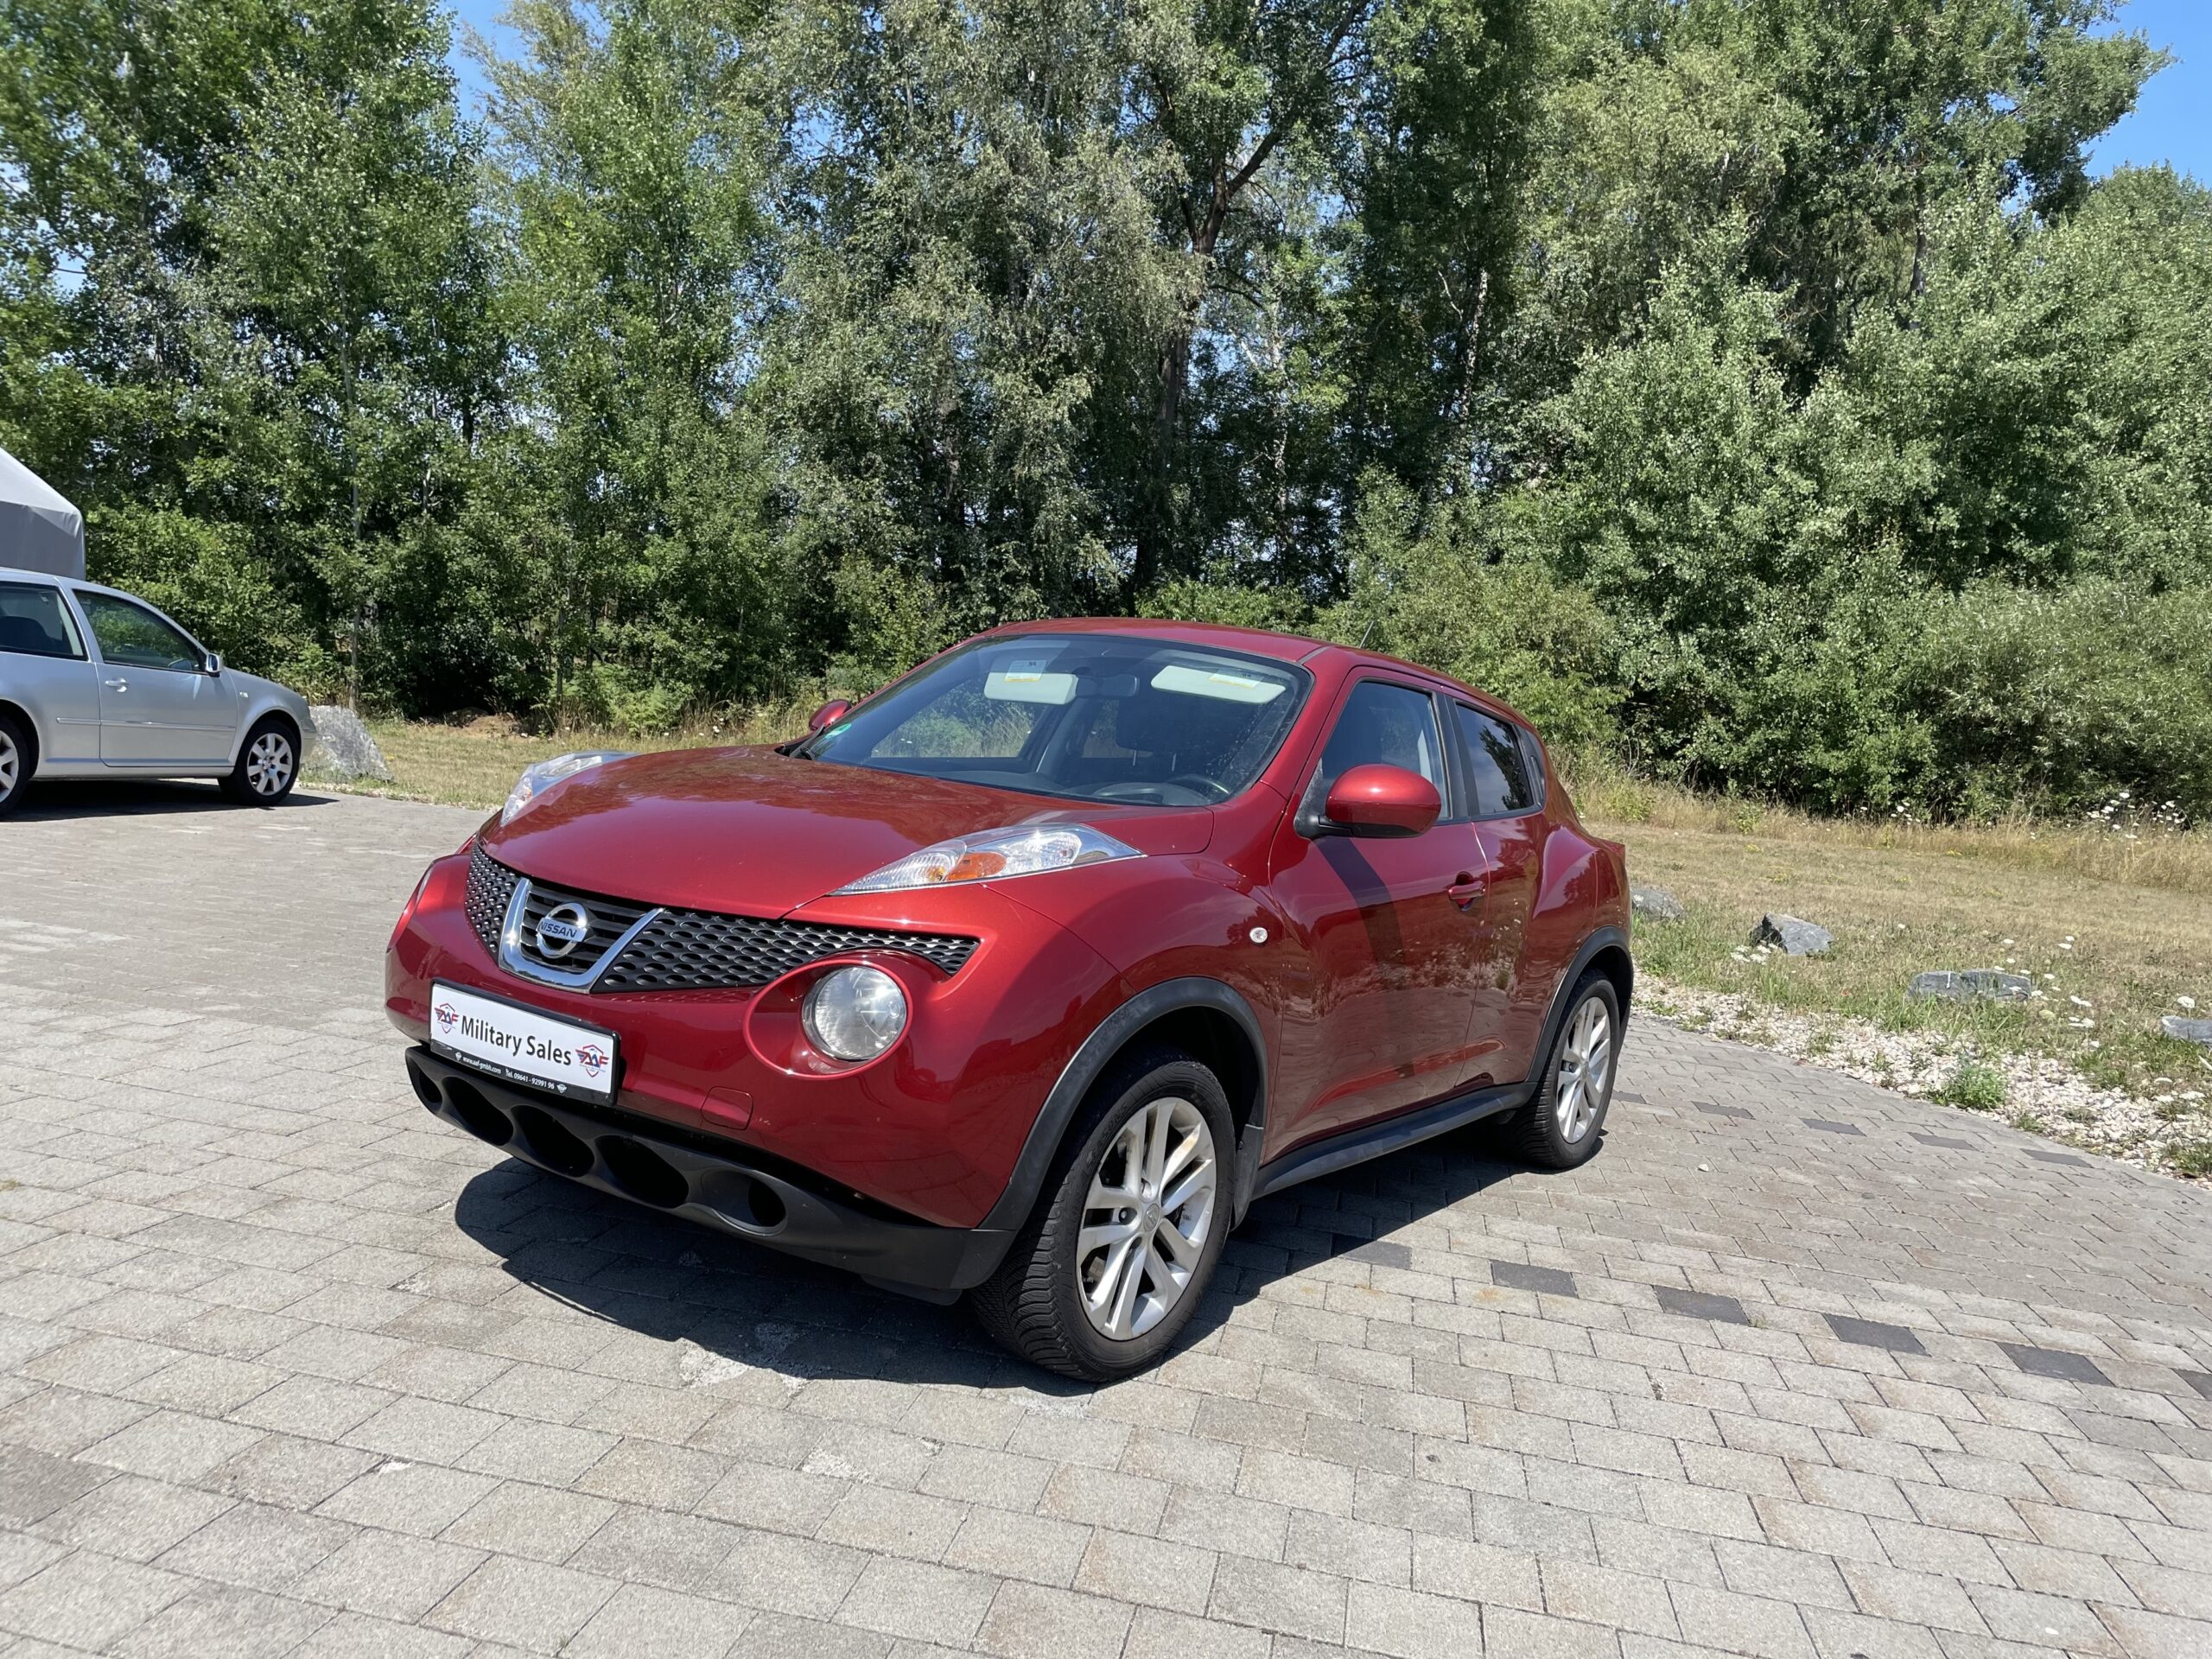 2012 Nissan Juke<br>4WD</br>as low as </br>$76 per paycheck